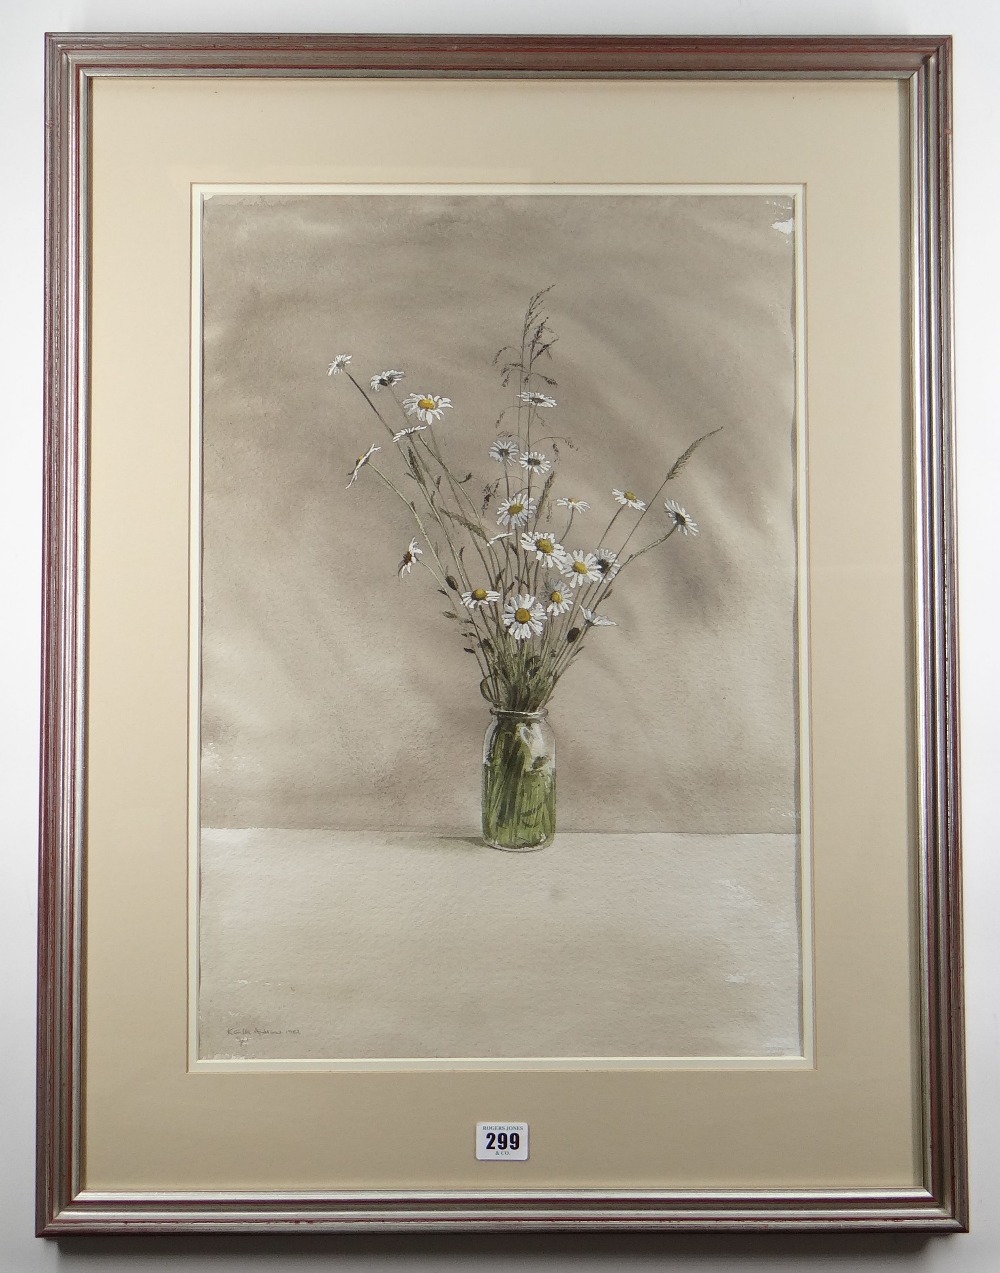 KEITH ANDREW watercolour - still-life, entitled verso on Attic Gallery Swansea label 'Daisy Jar', - Image 2 of 2